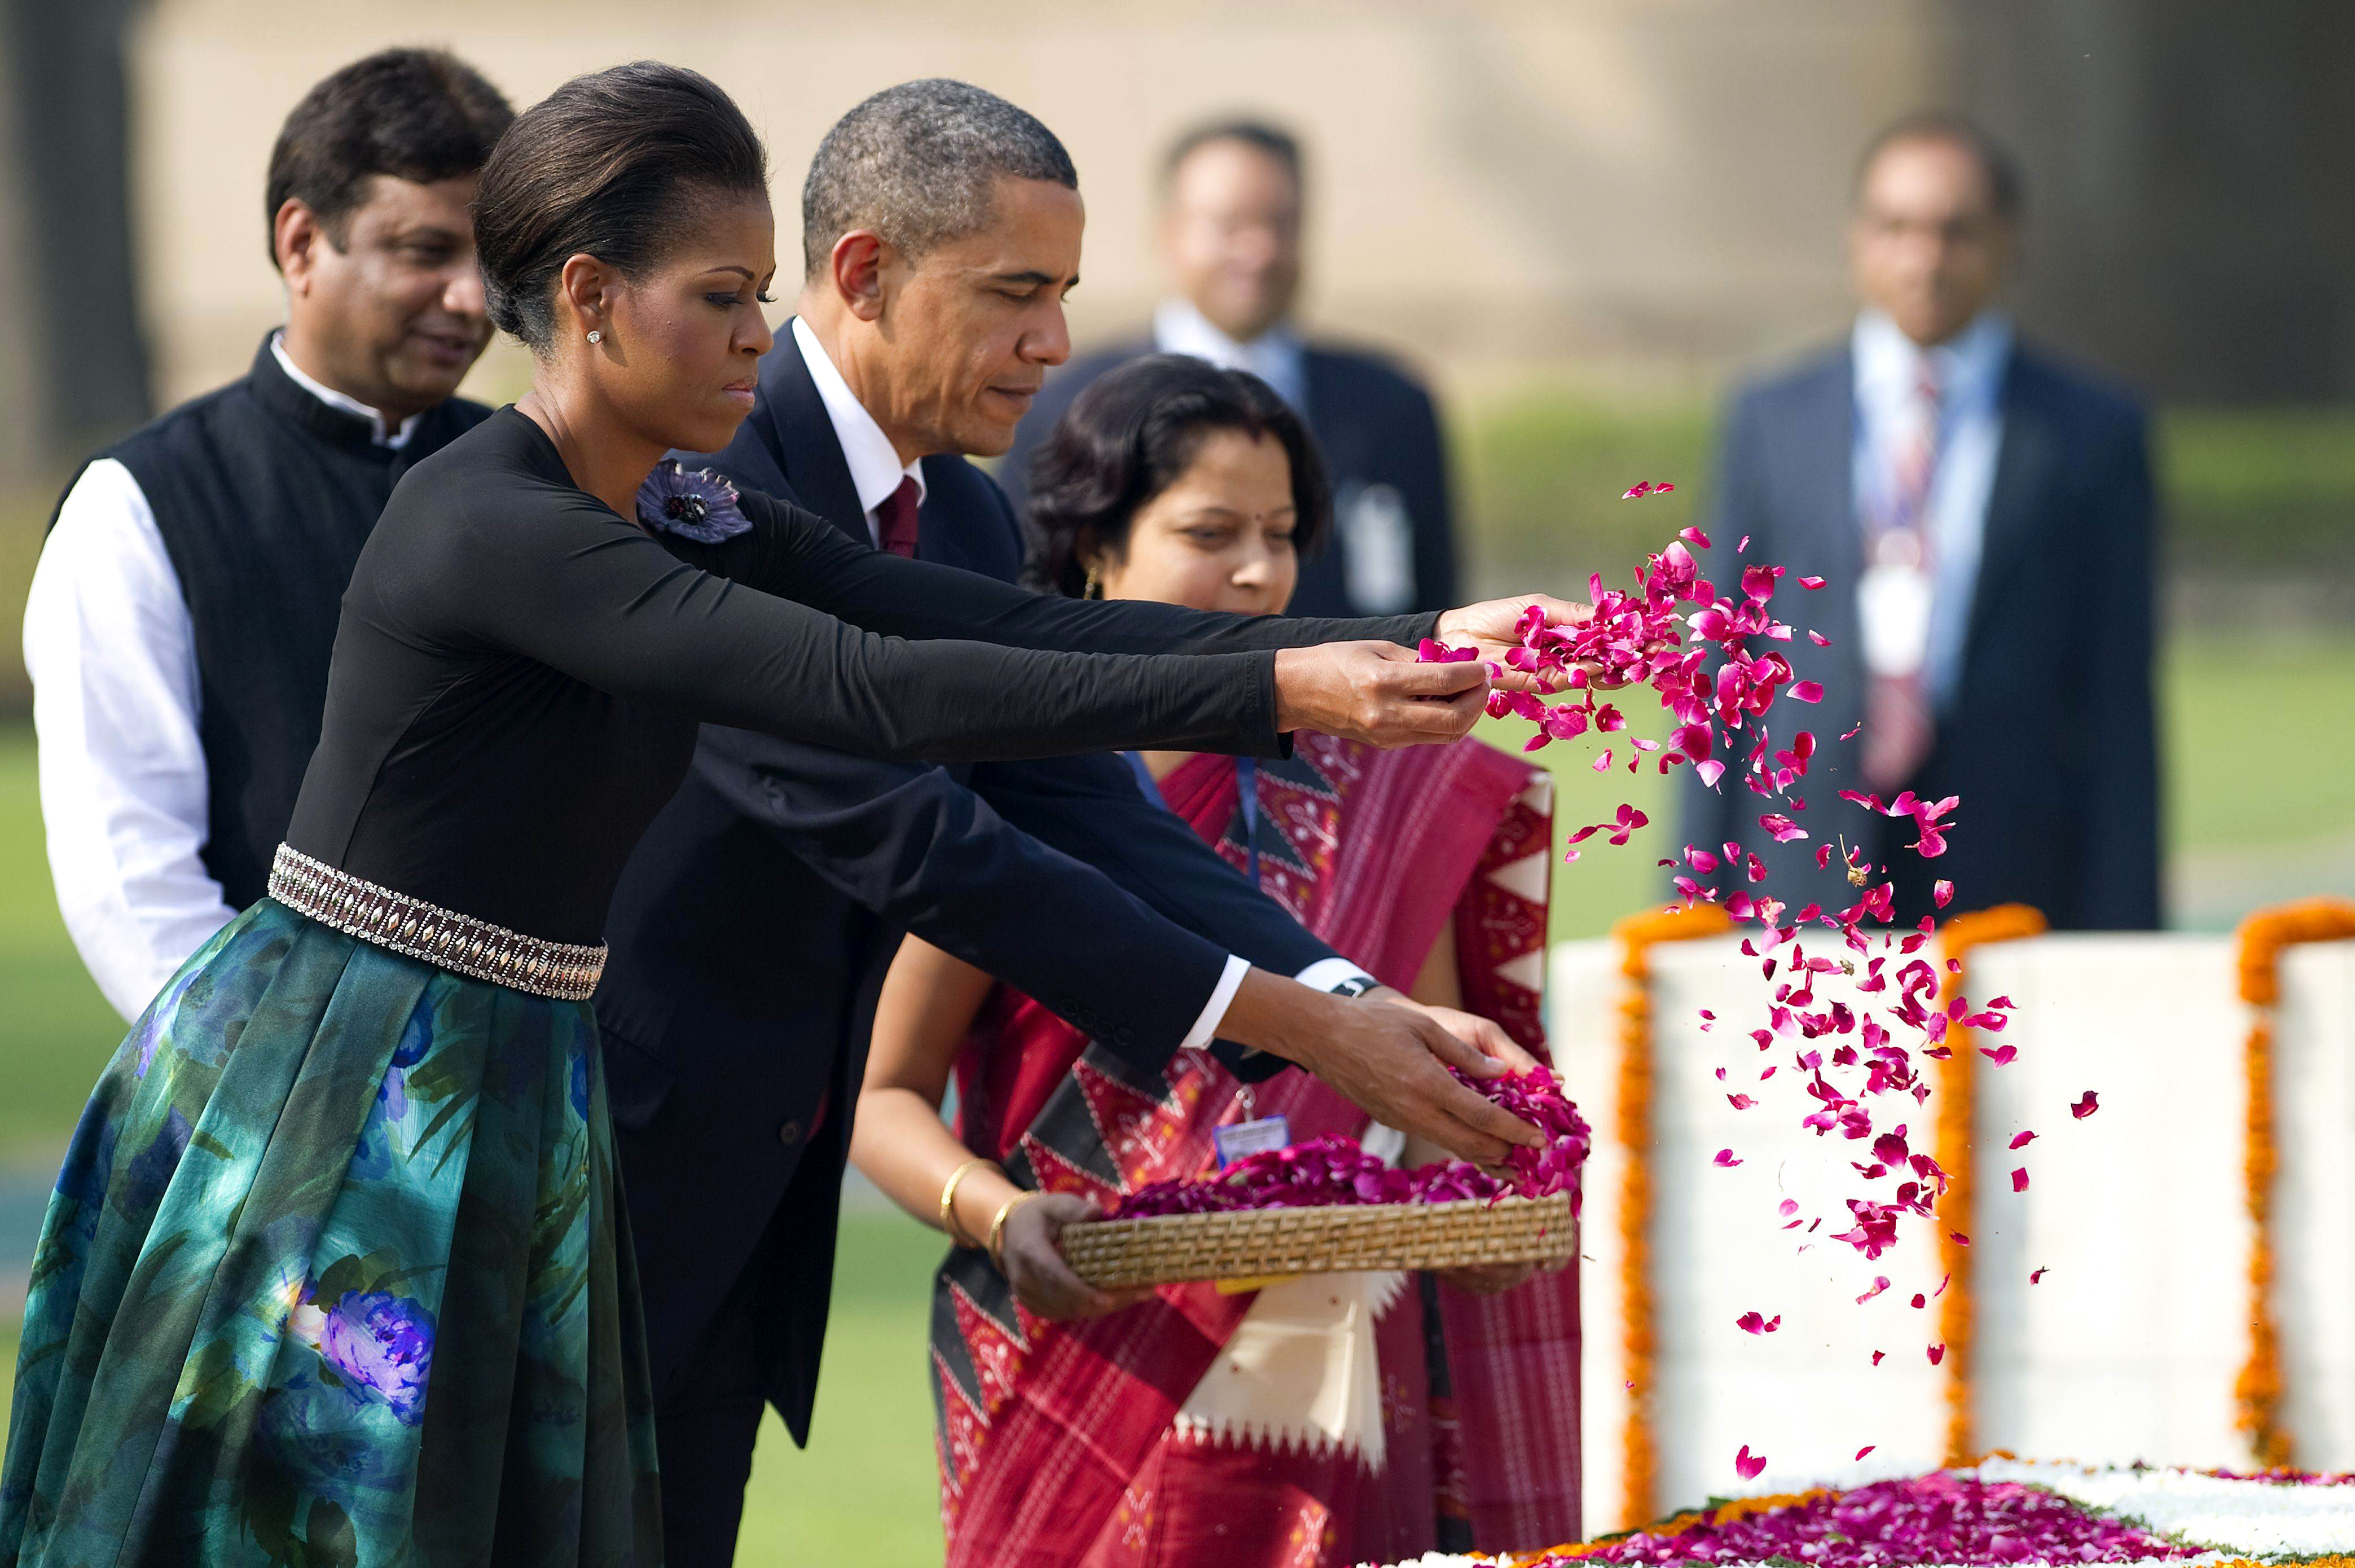 U.S. President Barack Obama and First Lady Michelle Obama spread rose petals as they participate in a wreath laying ceremony at Raj Ghat in New Delhi, India, Nov. 8, 2010.